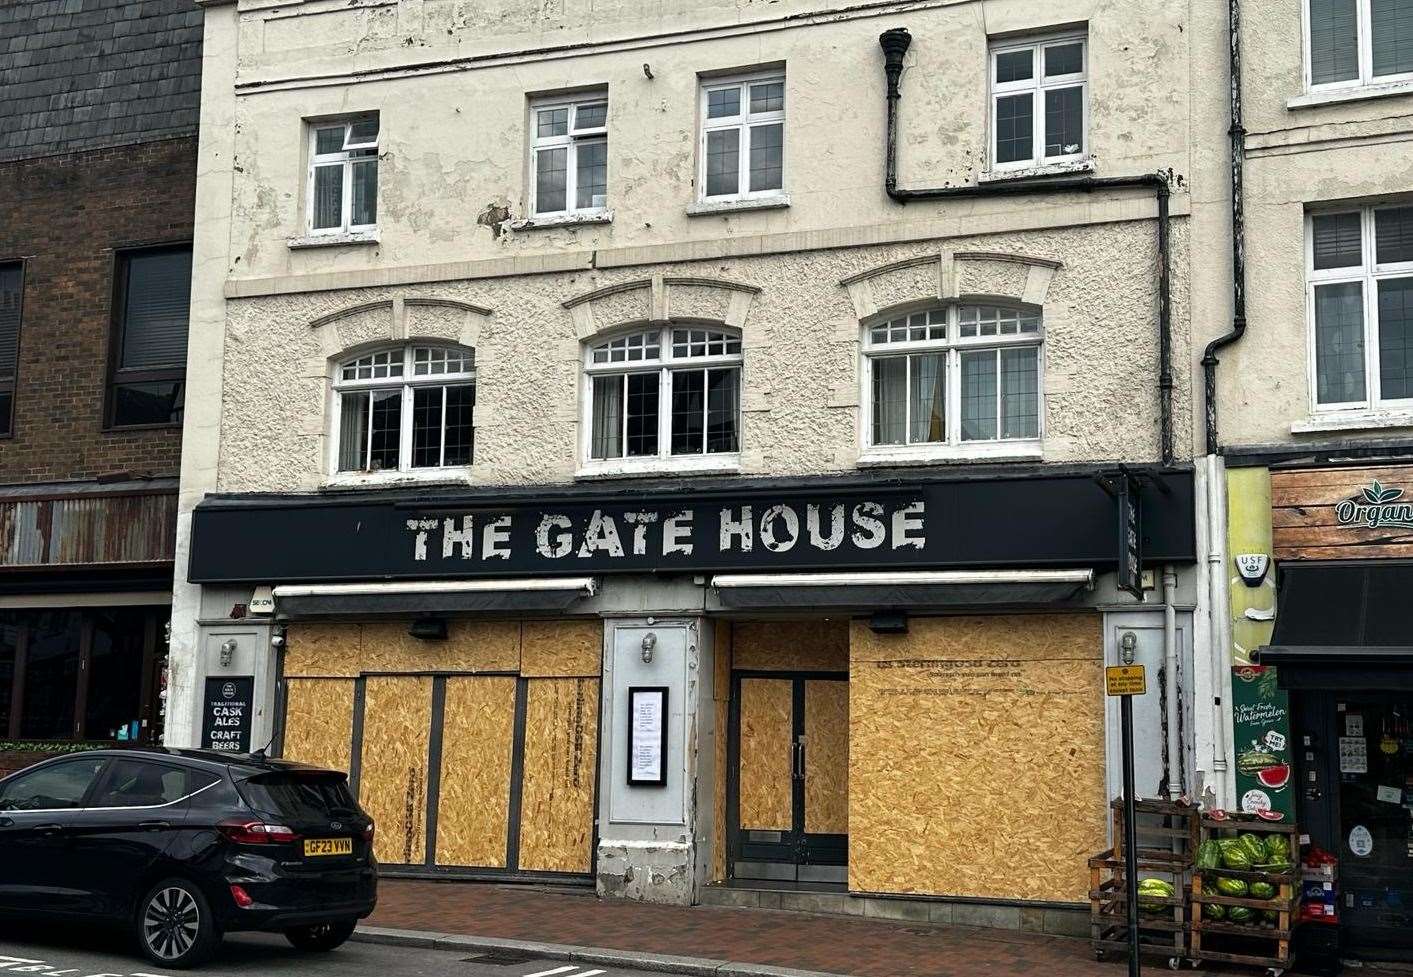 The once loved pub is now boarded up